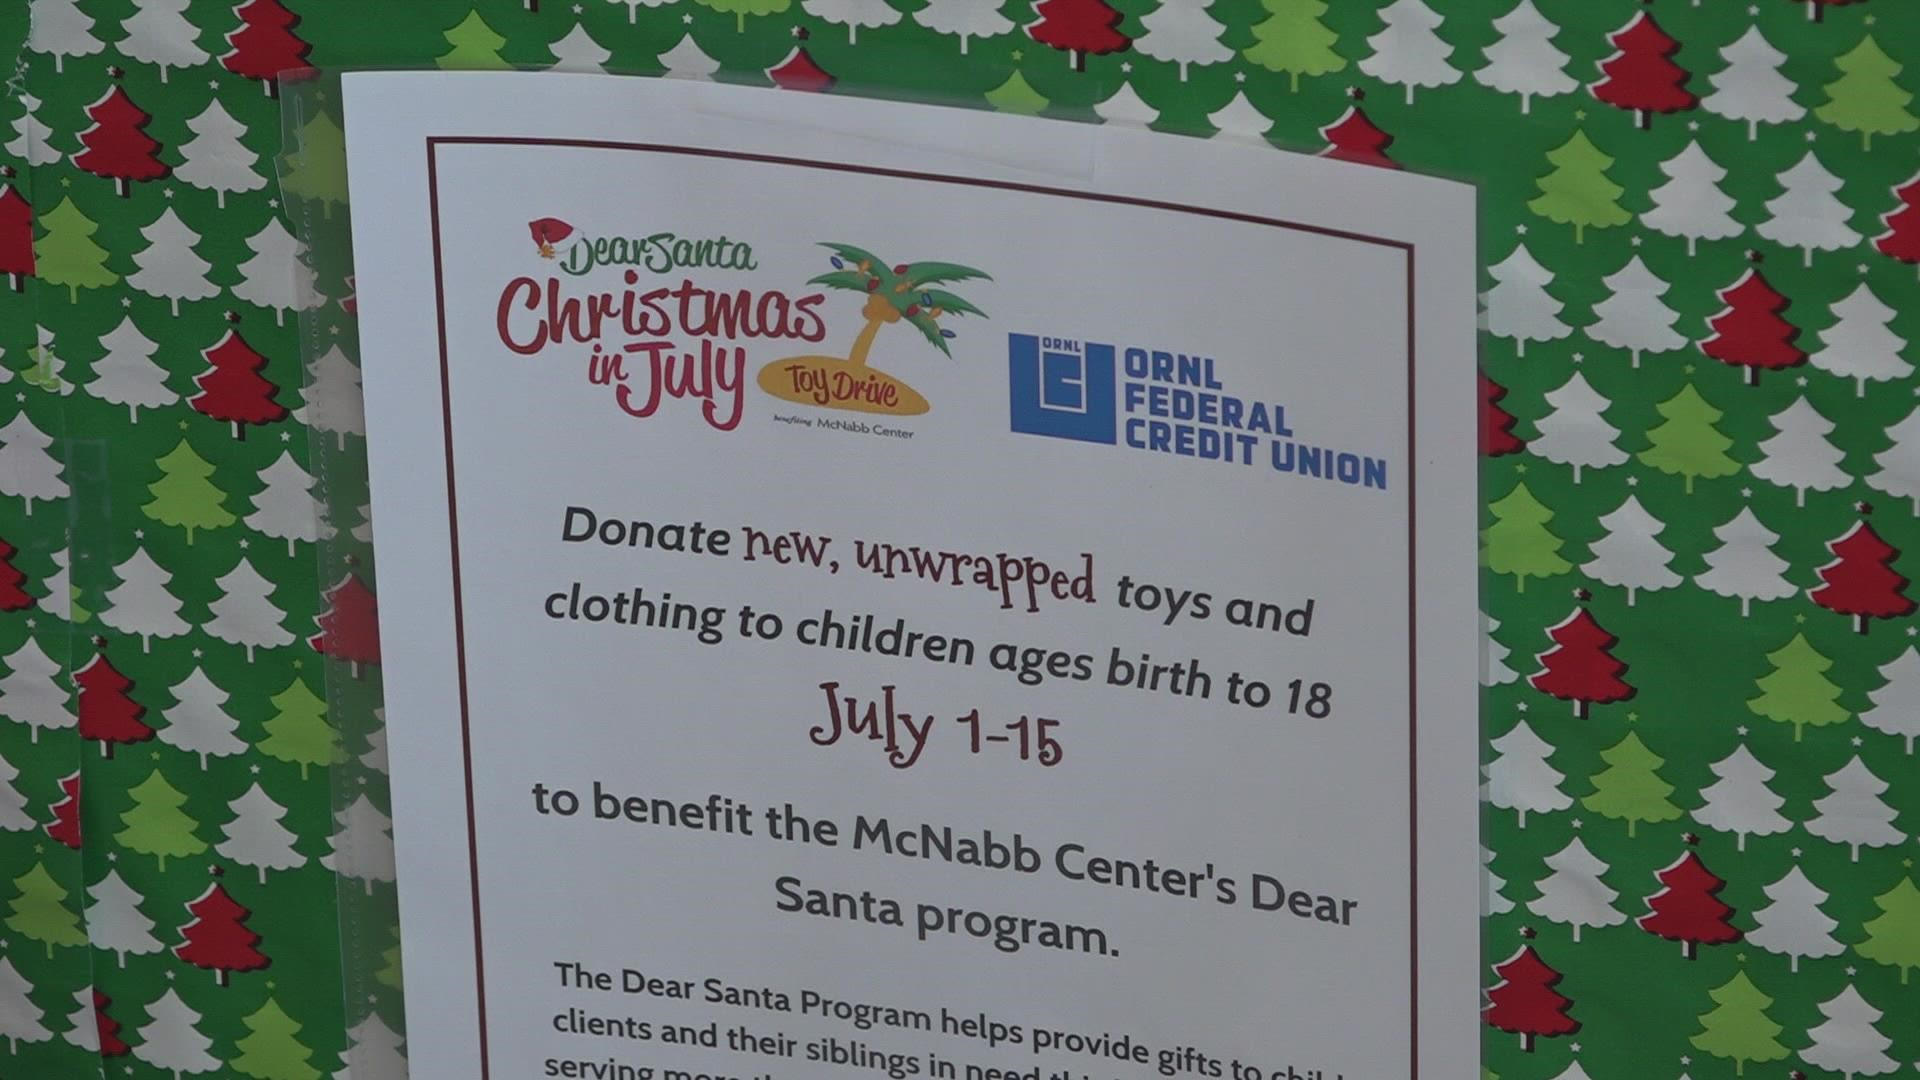 The McNabb Center served over 450 kids last year through the July program.